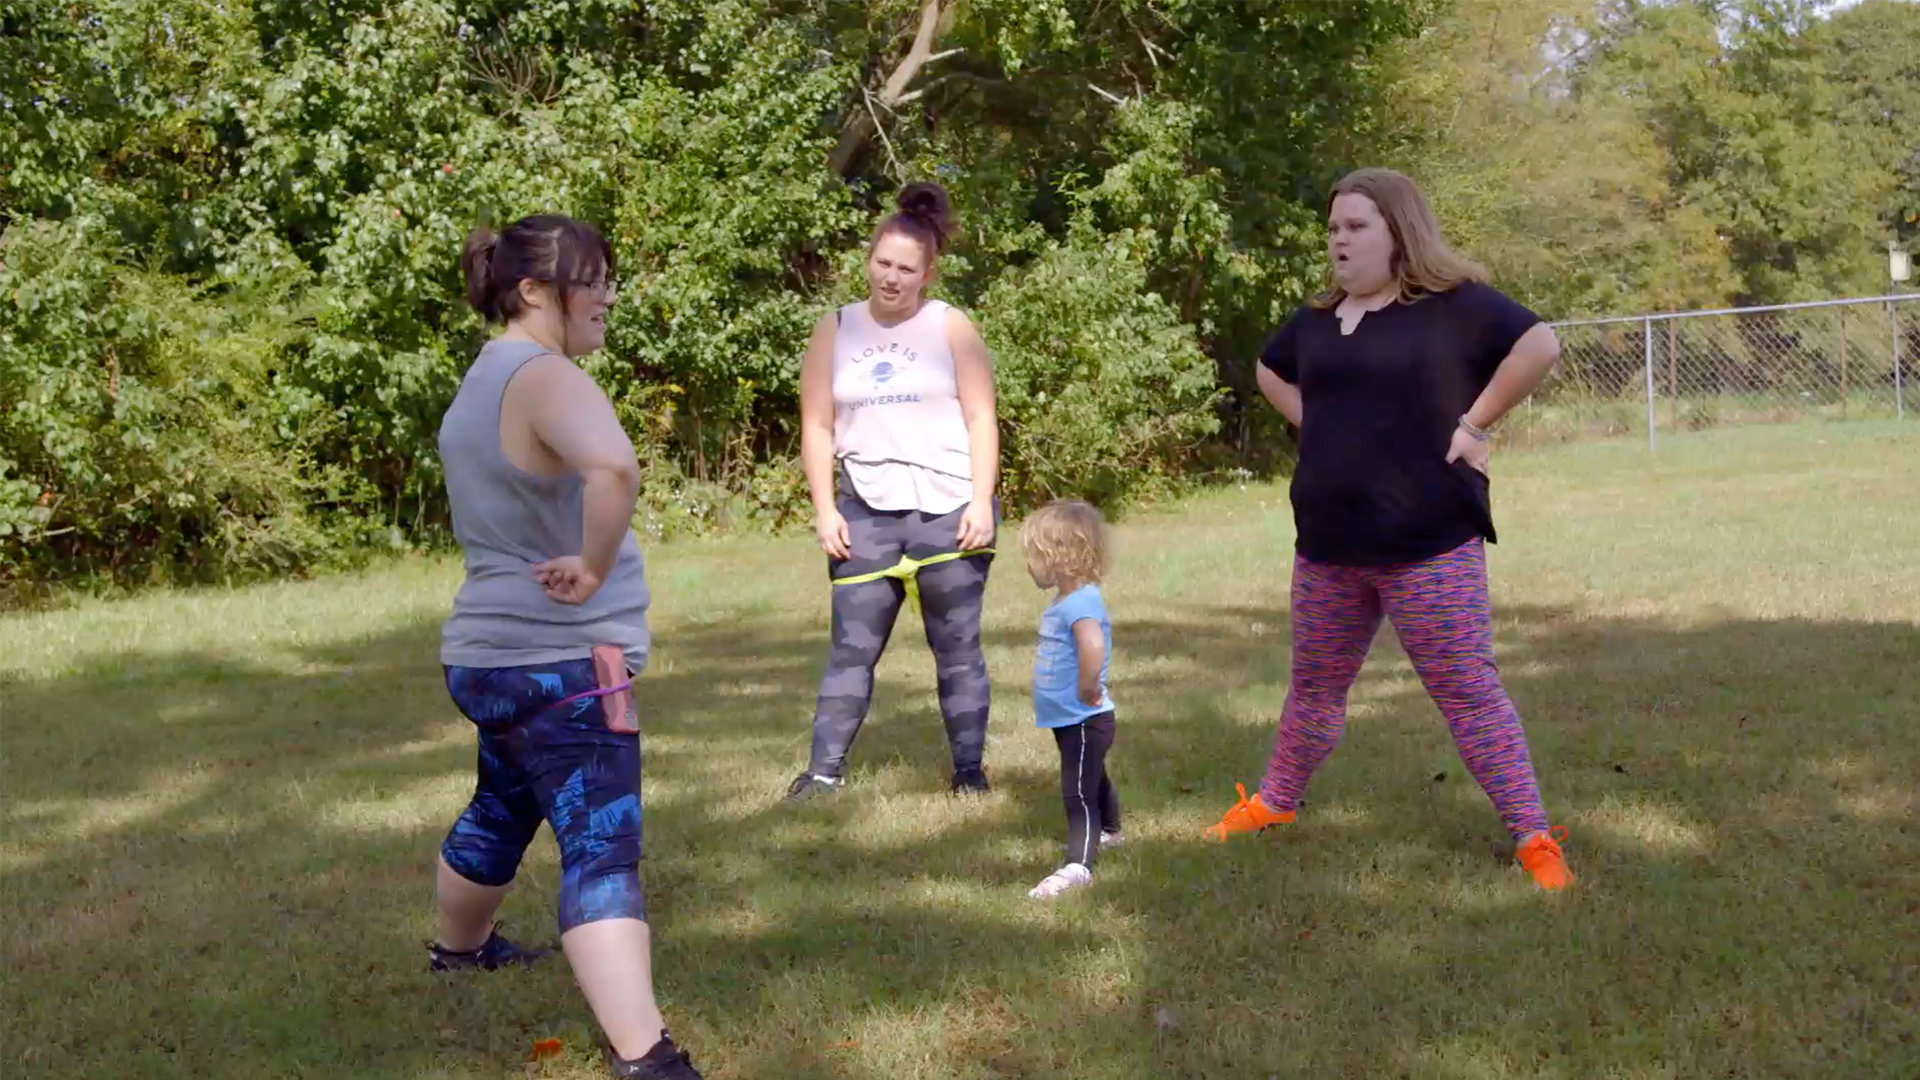 Watch Family Healing Tip #102: Exercise Together! | Mama June: From Not to Hot Video Extras